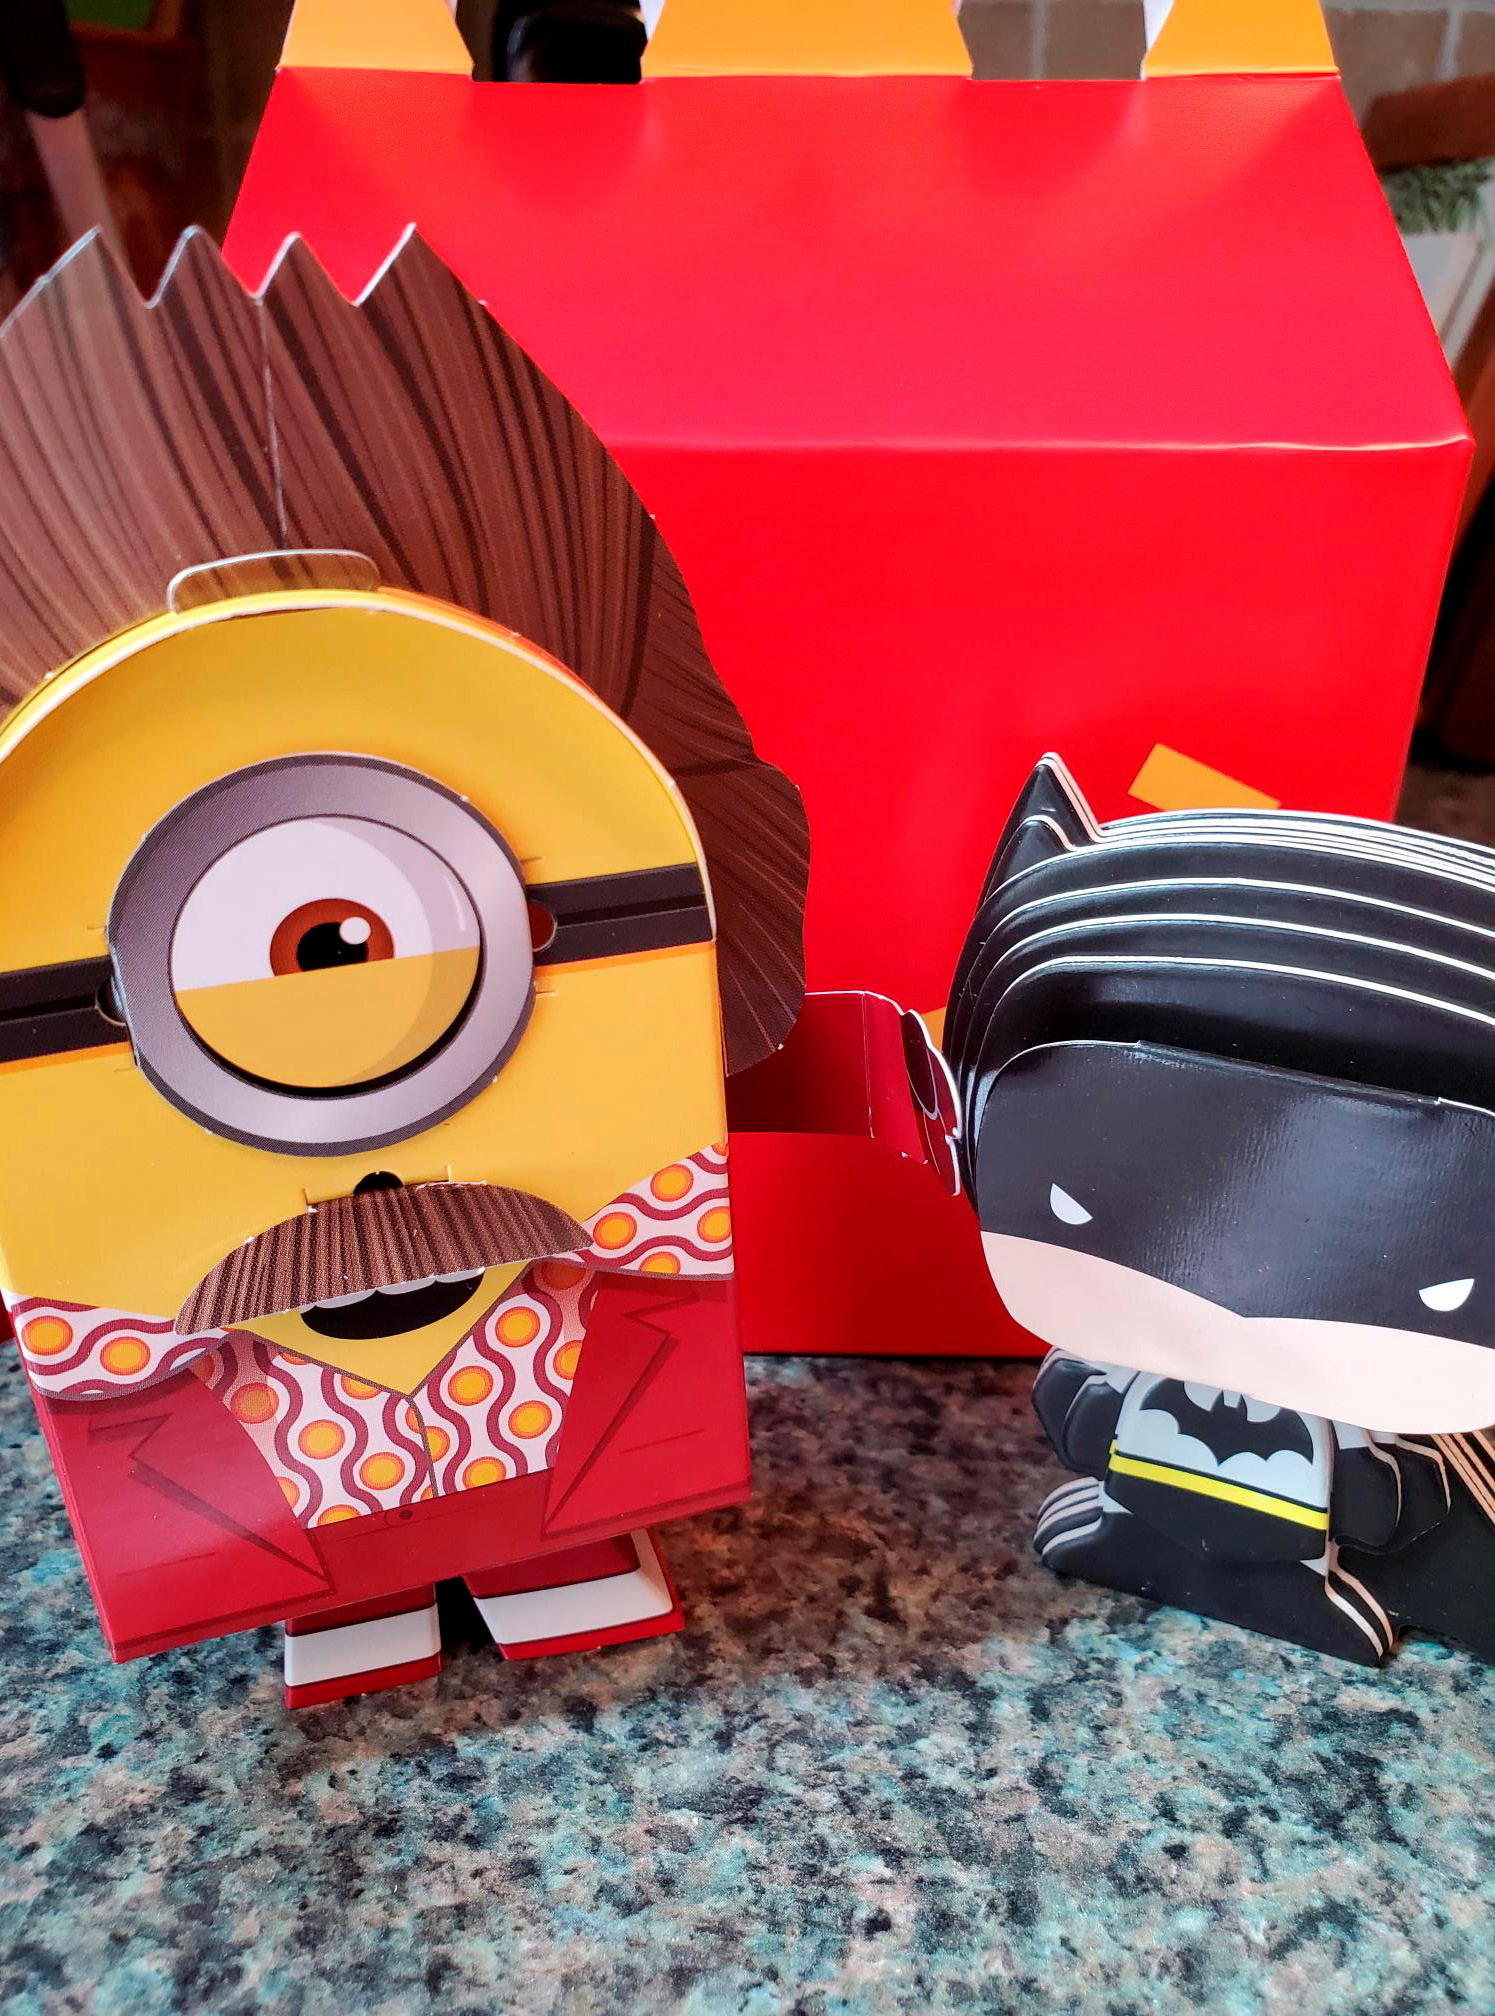 Batman and Minions toys made from paper and cardboard that children assemble themselves are seen, as McDonald's makes its future Happy Meal toys for kids more sustainable, in New York, U.S. September 20, 2021. REUTERS/Hilary Russ